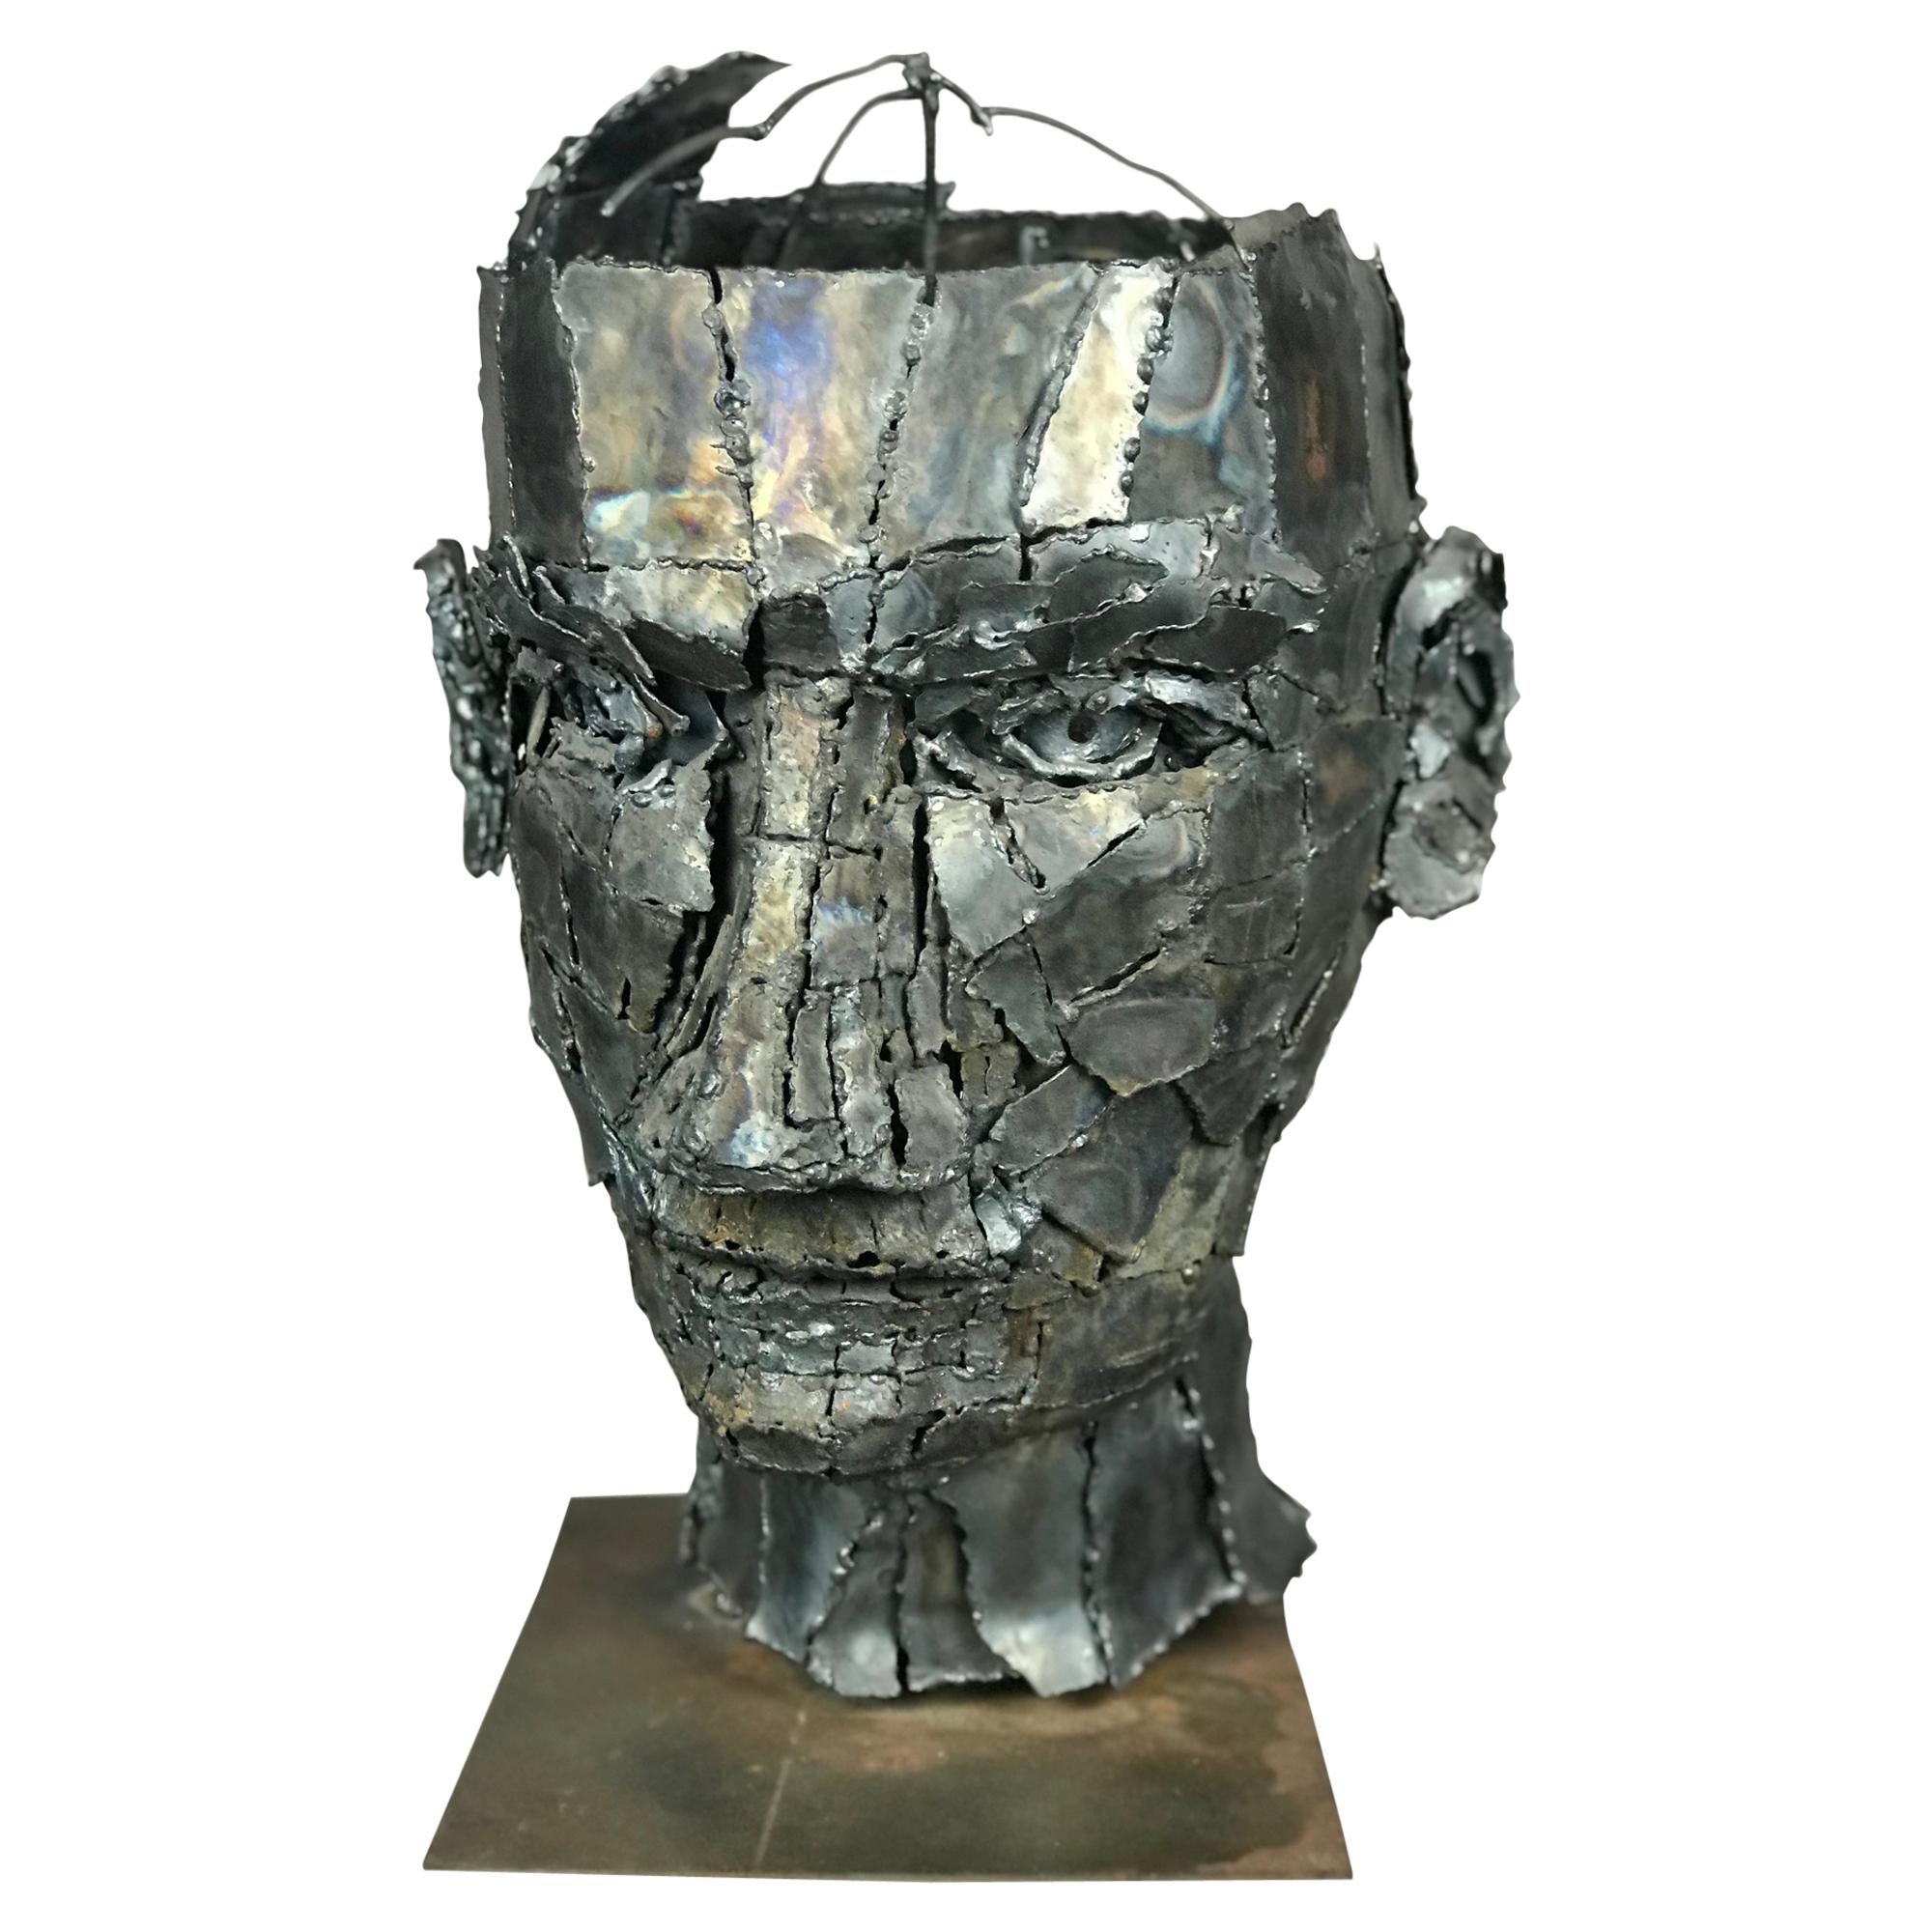 Oversized bust or head sculpture with patchwork torch cut steel pieces welded and braised on a frame. Incredibly figured and detailed expression. Has oxidation/age/wear on the inside and mounting plate. Artist unknown, circa 1960s-1970s when this